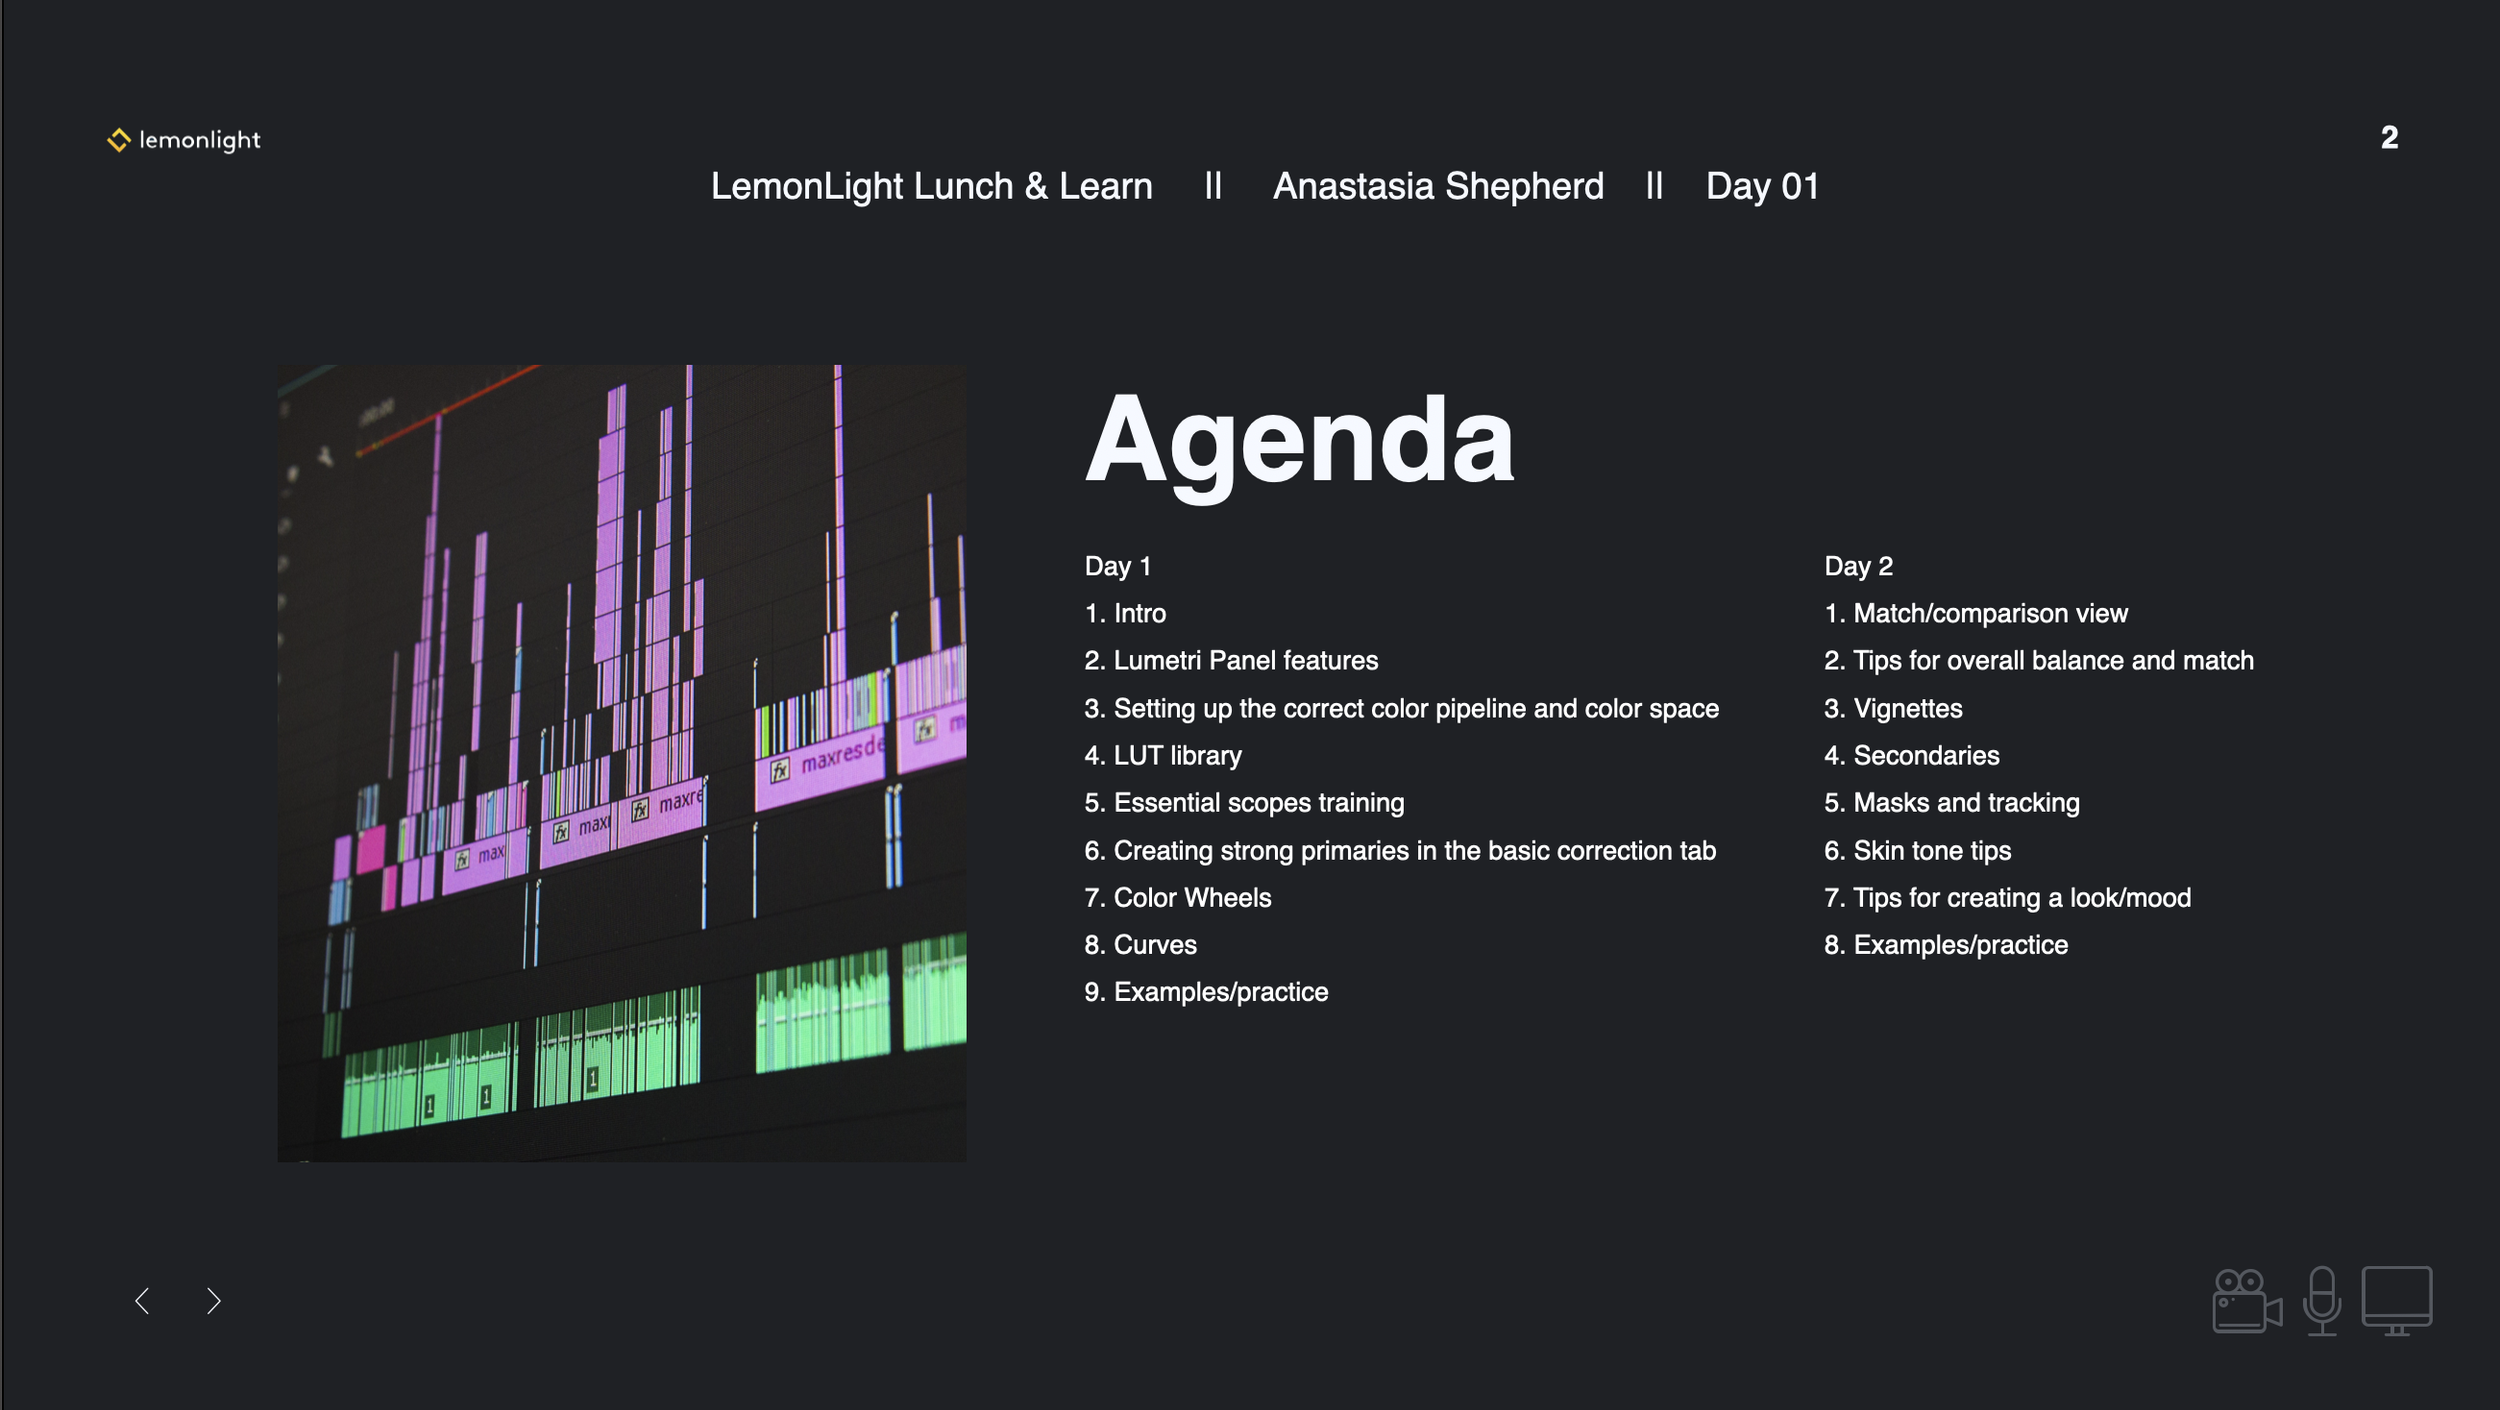 The agenda for my most recent class, a deep dive into Premiere's Lumetri color tool designed for editors